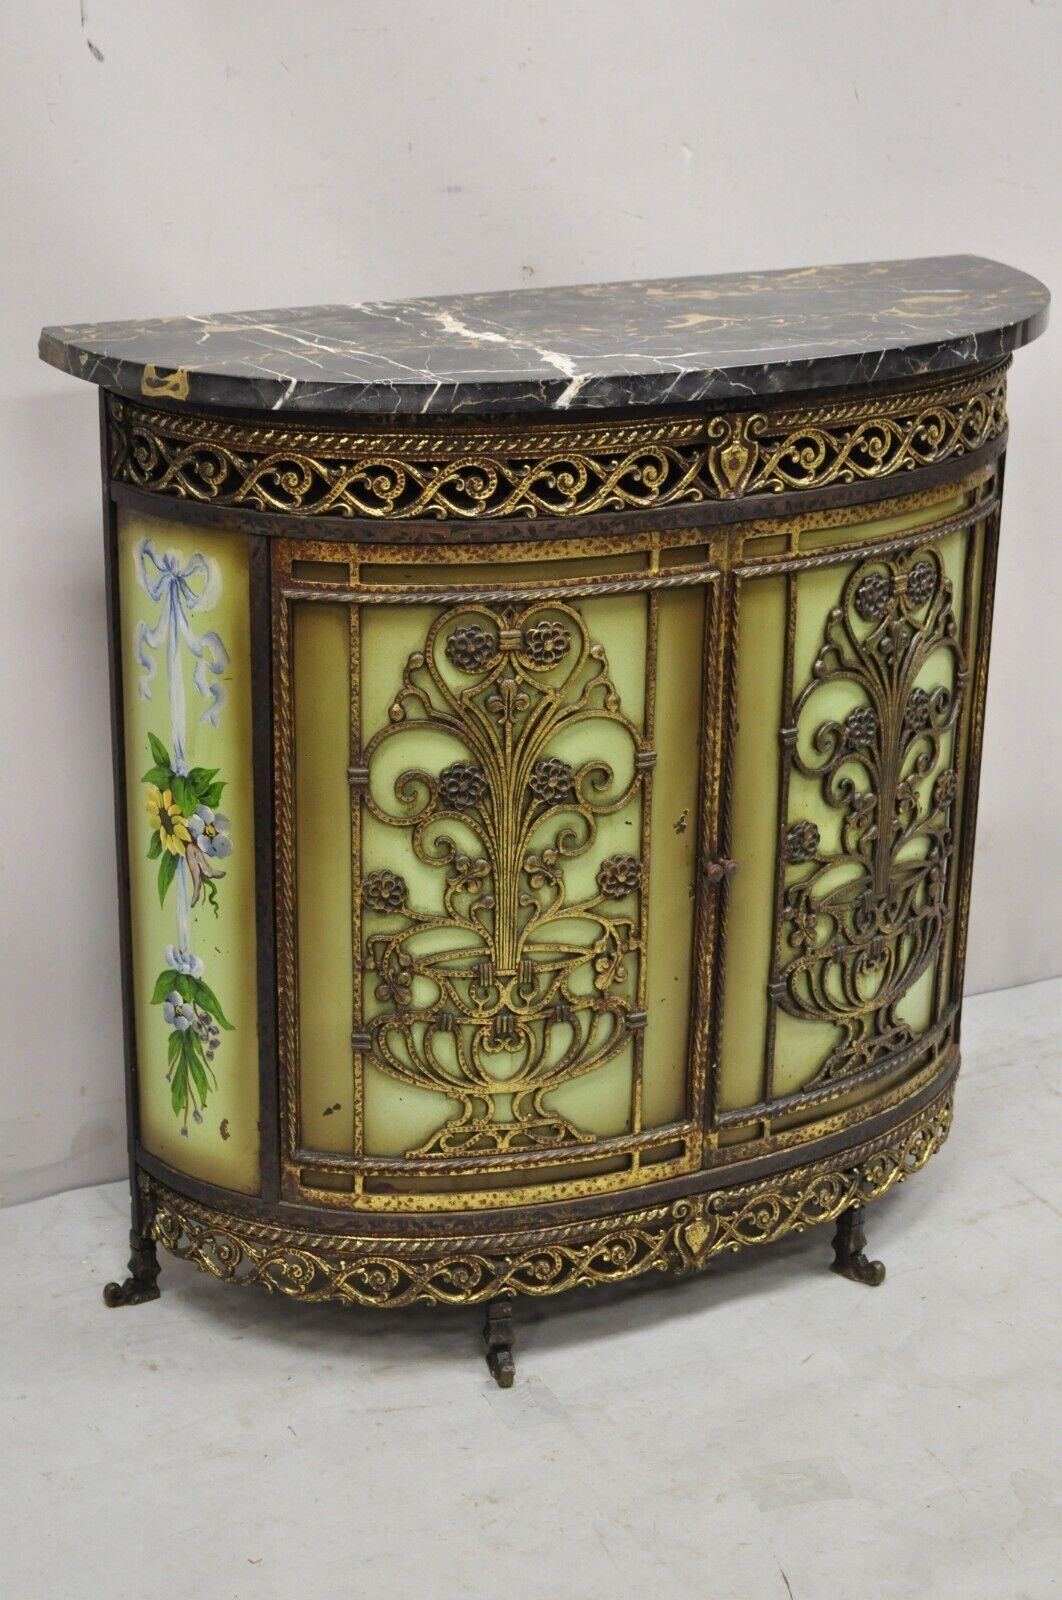 French Victorian wrought iron Oscar bach Demilune marble top console cabinet. Item features a hand painted green finish with flower, demilune marble top, pierced iron details, wrought iron construction, 2 swing doors, very nice antique item, great